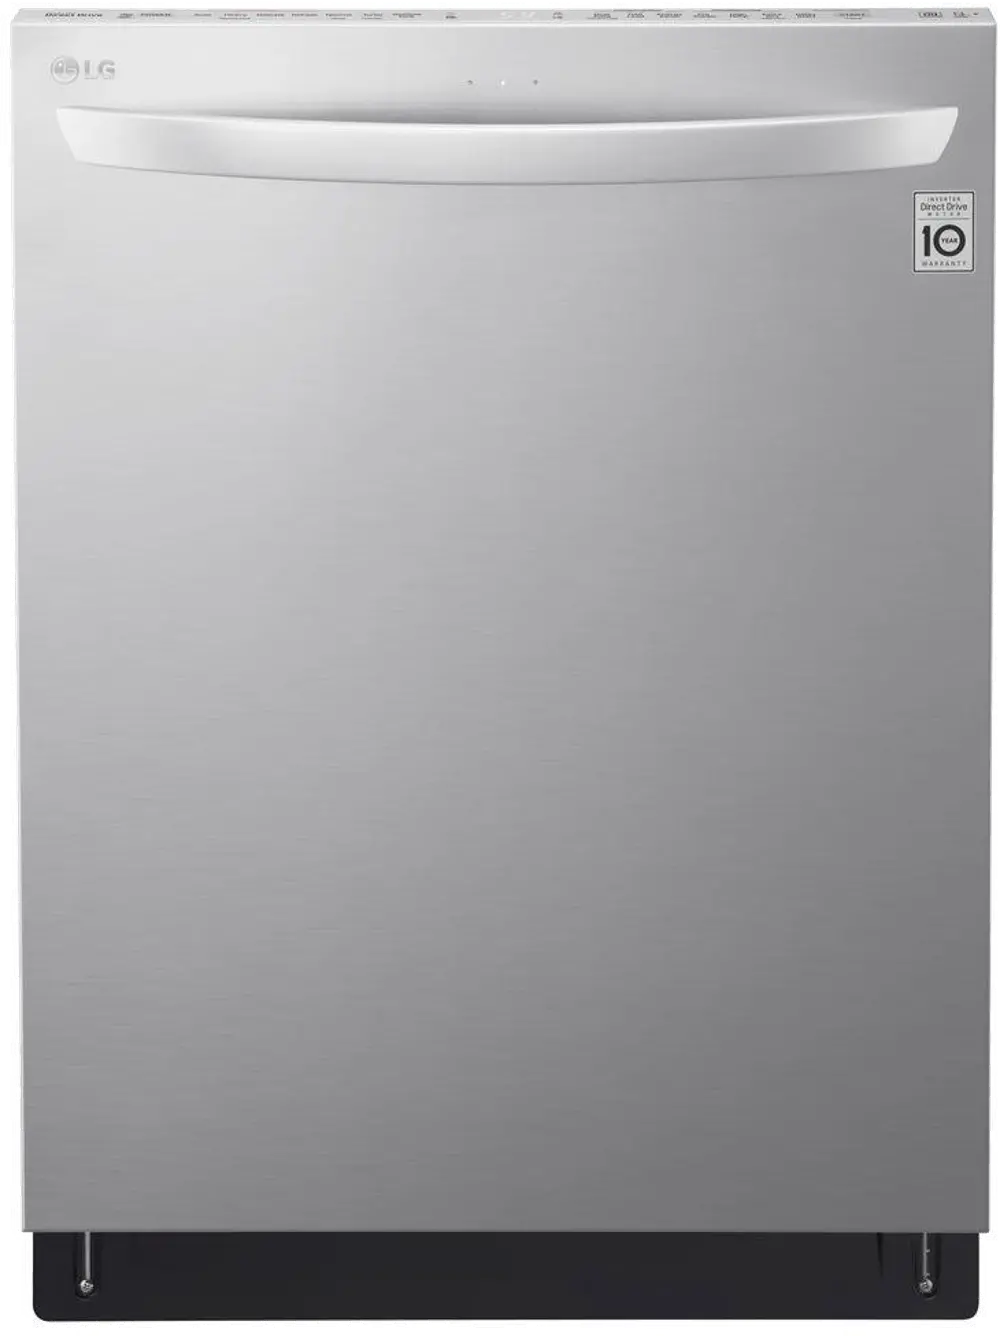 LDT5665ST LG Top Control Dishwasher with Bar Handle - Stainless Steel-1